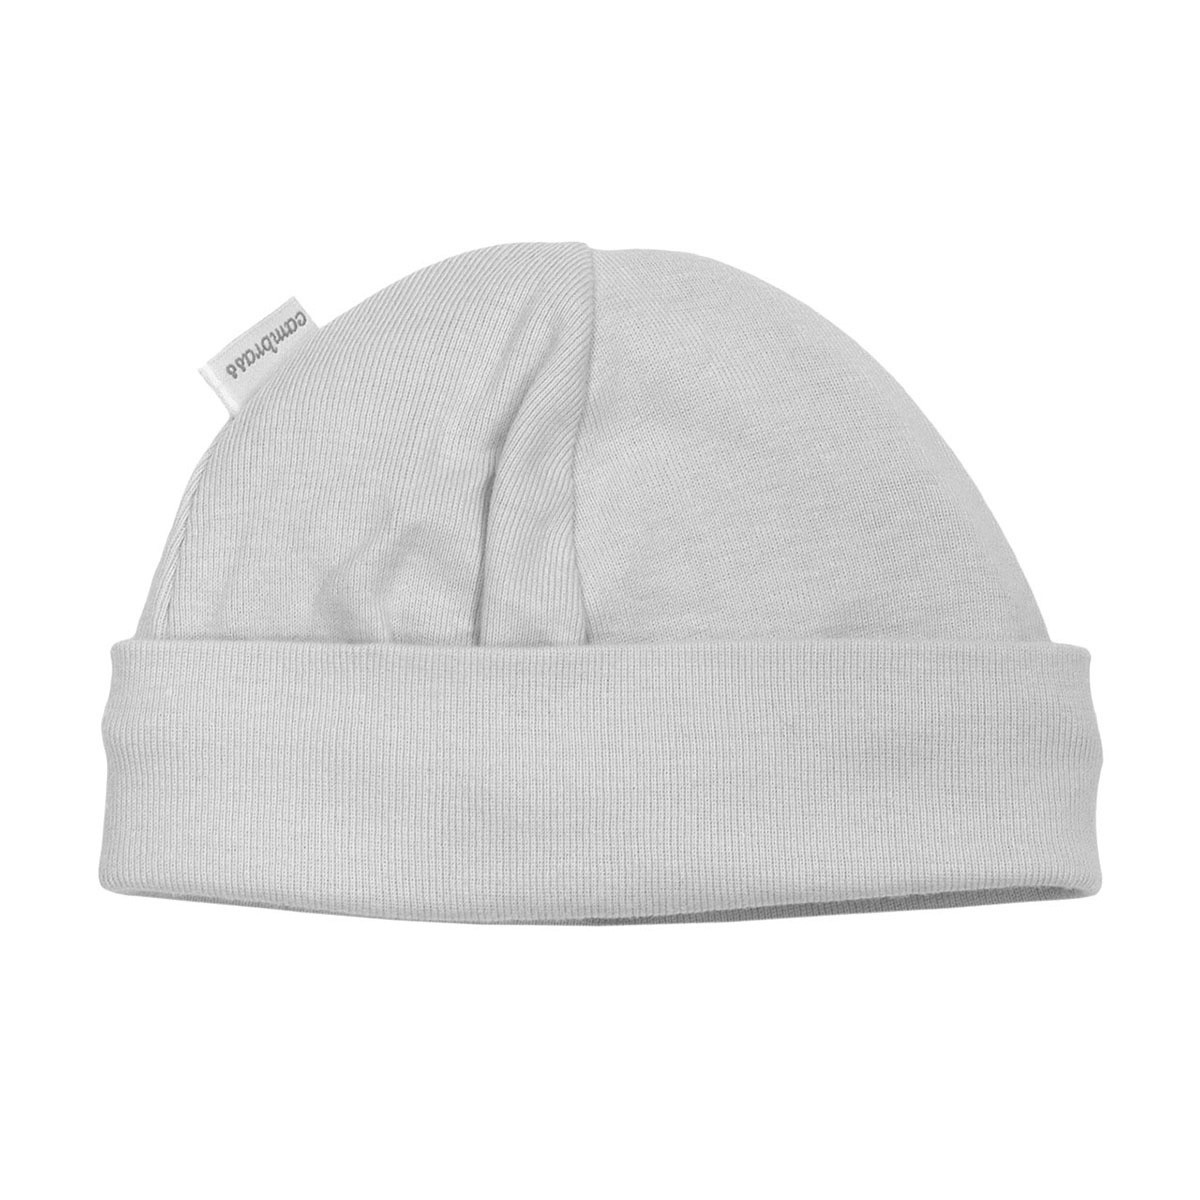 TRICOT CAP LISO GREY CAMBRASS - 1